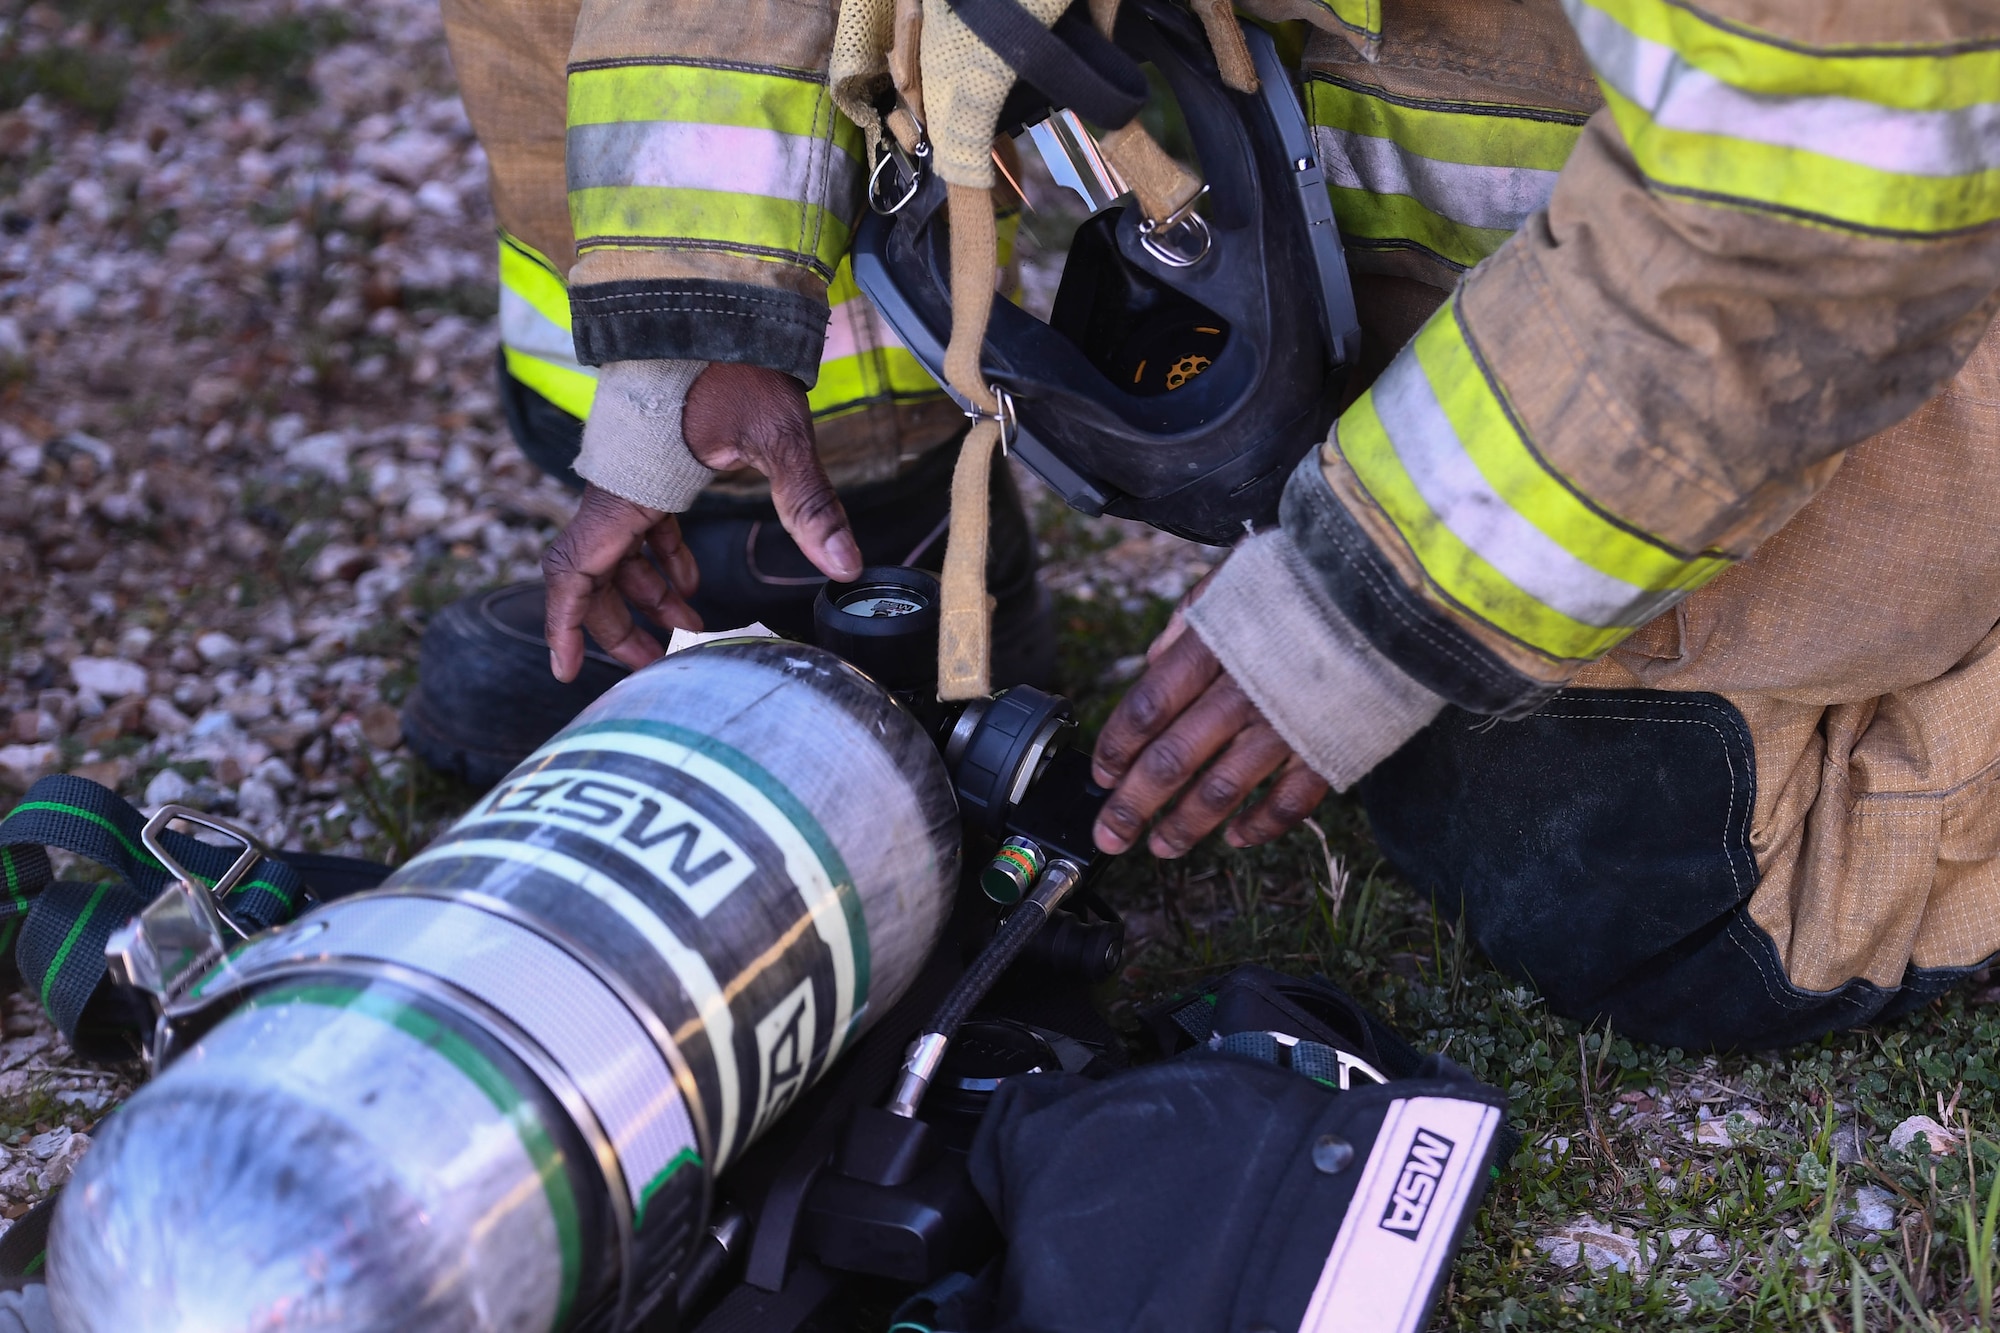 A Shreveport Fire Department firefighter checks over his gear before a live fire training exercise March 21, 2019, at Barksdale Air Force Base, Louisiana. Shreveport Fire Department conducts simulated aircraft fires every year with the 2nd Civil Engineering Squadron Fire Department. (U.S. Air Force photo by Airman Jacob B. Wrightsman)